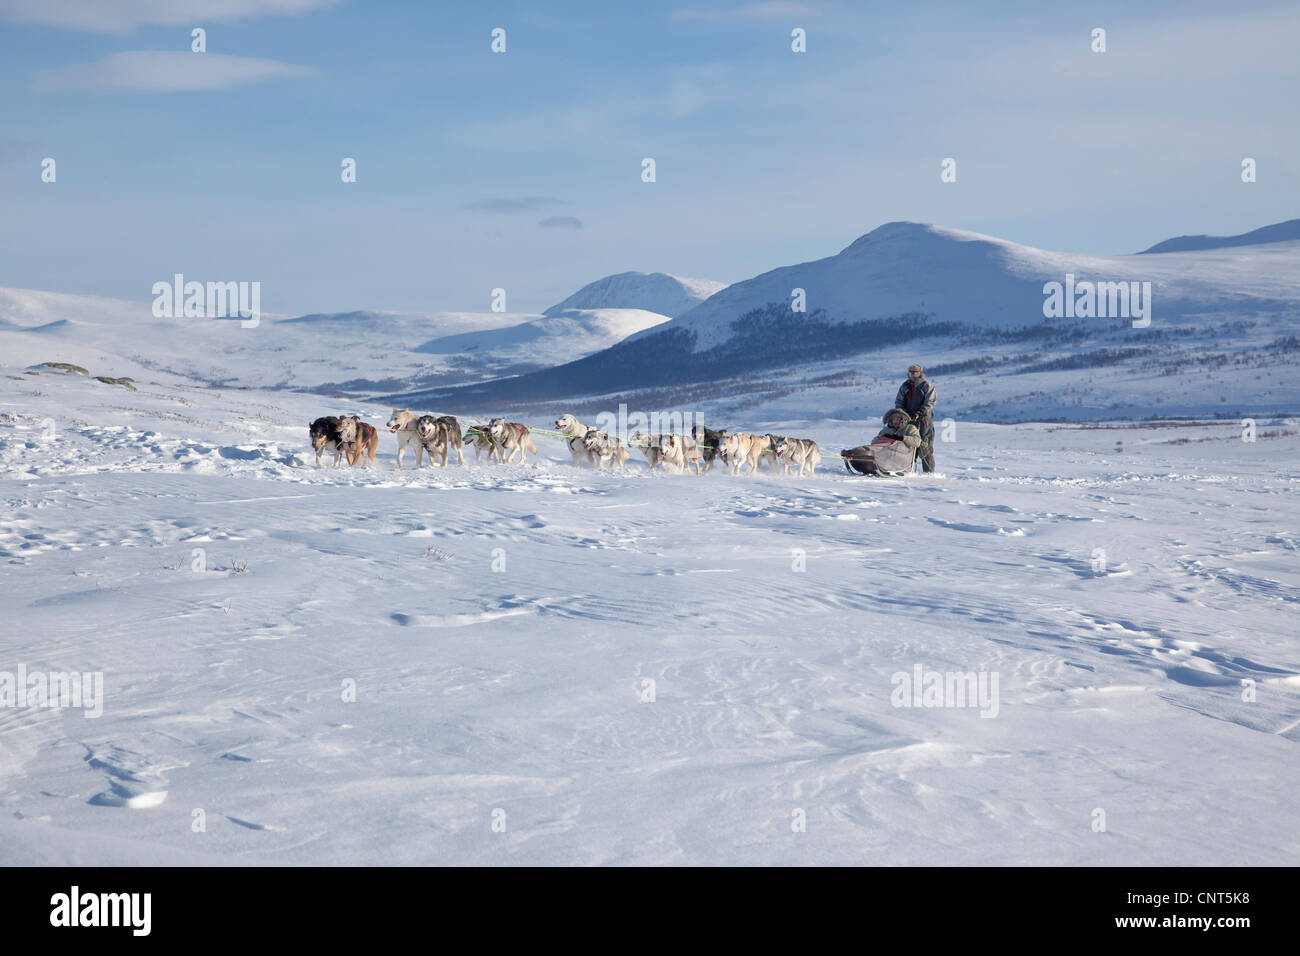 domestic dog (Canis lupus f. familiaris), dog sled with 14 dogs in snow landscape, Norway, Dovrefjell Sunndalsfjella National Park Stock Photo